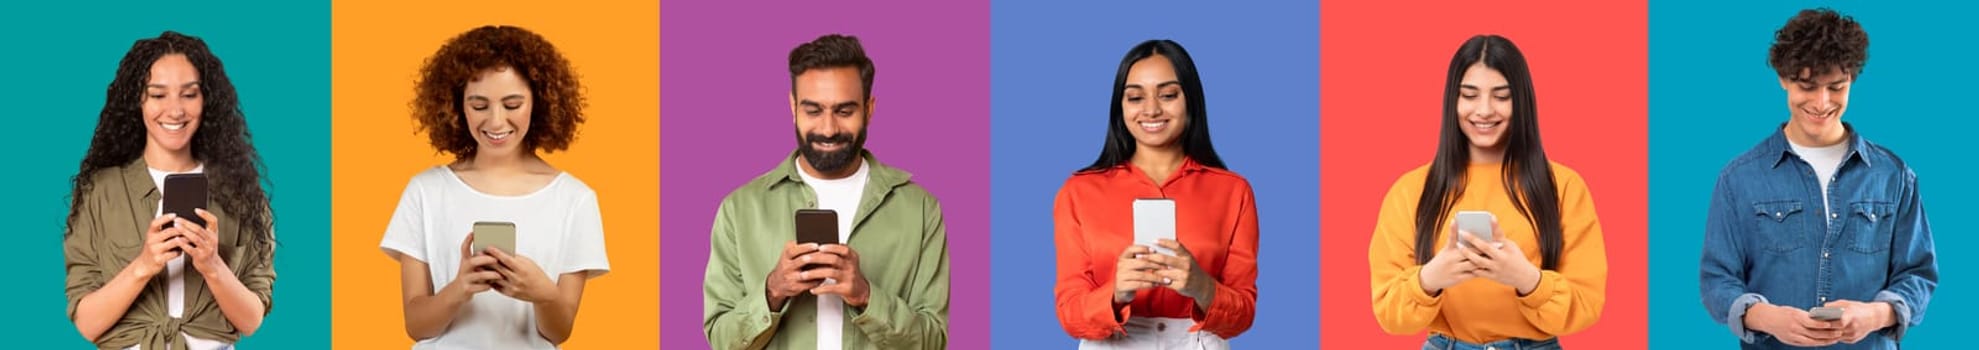 Six diverse individuals, men and women, with joyful expressions using smartphones